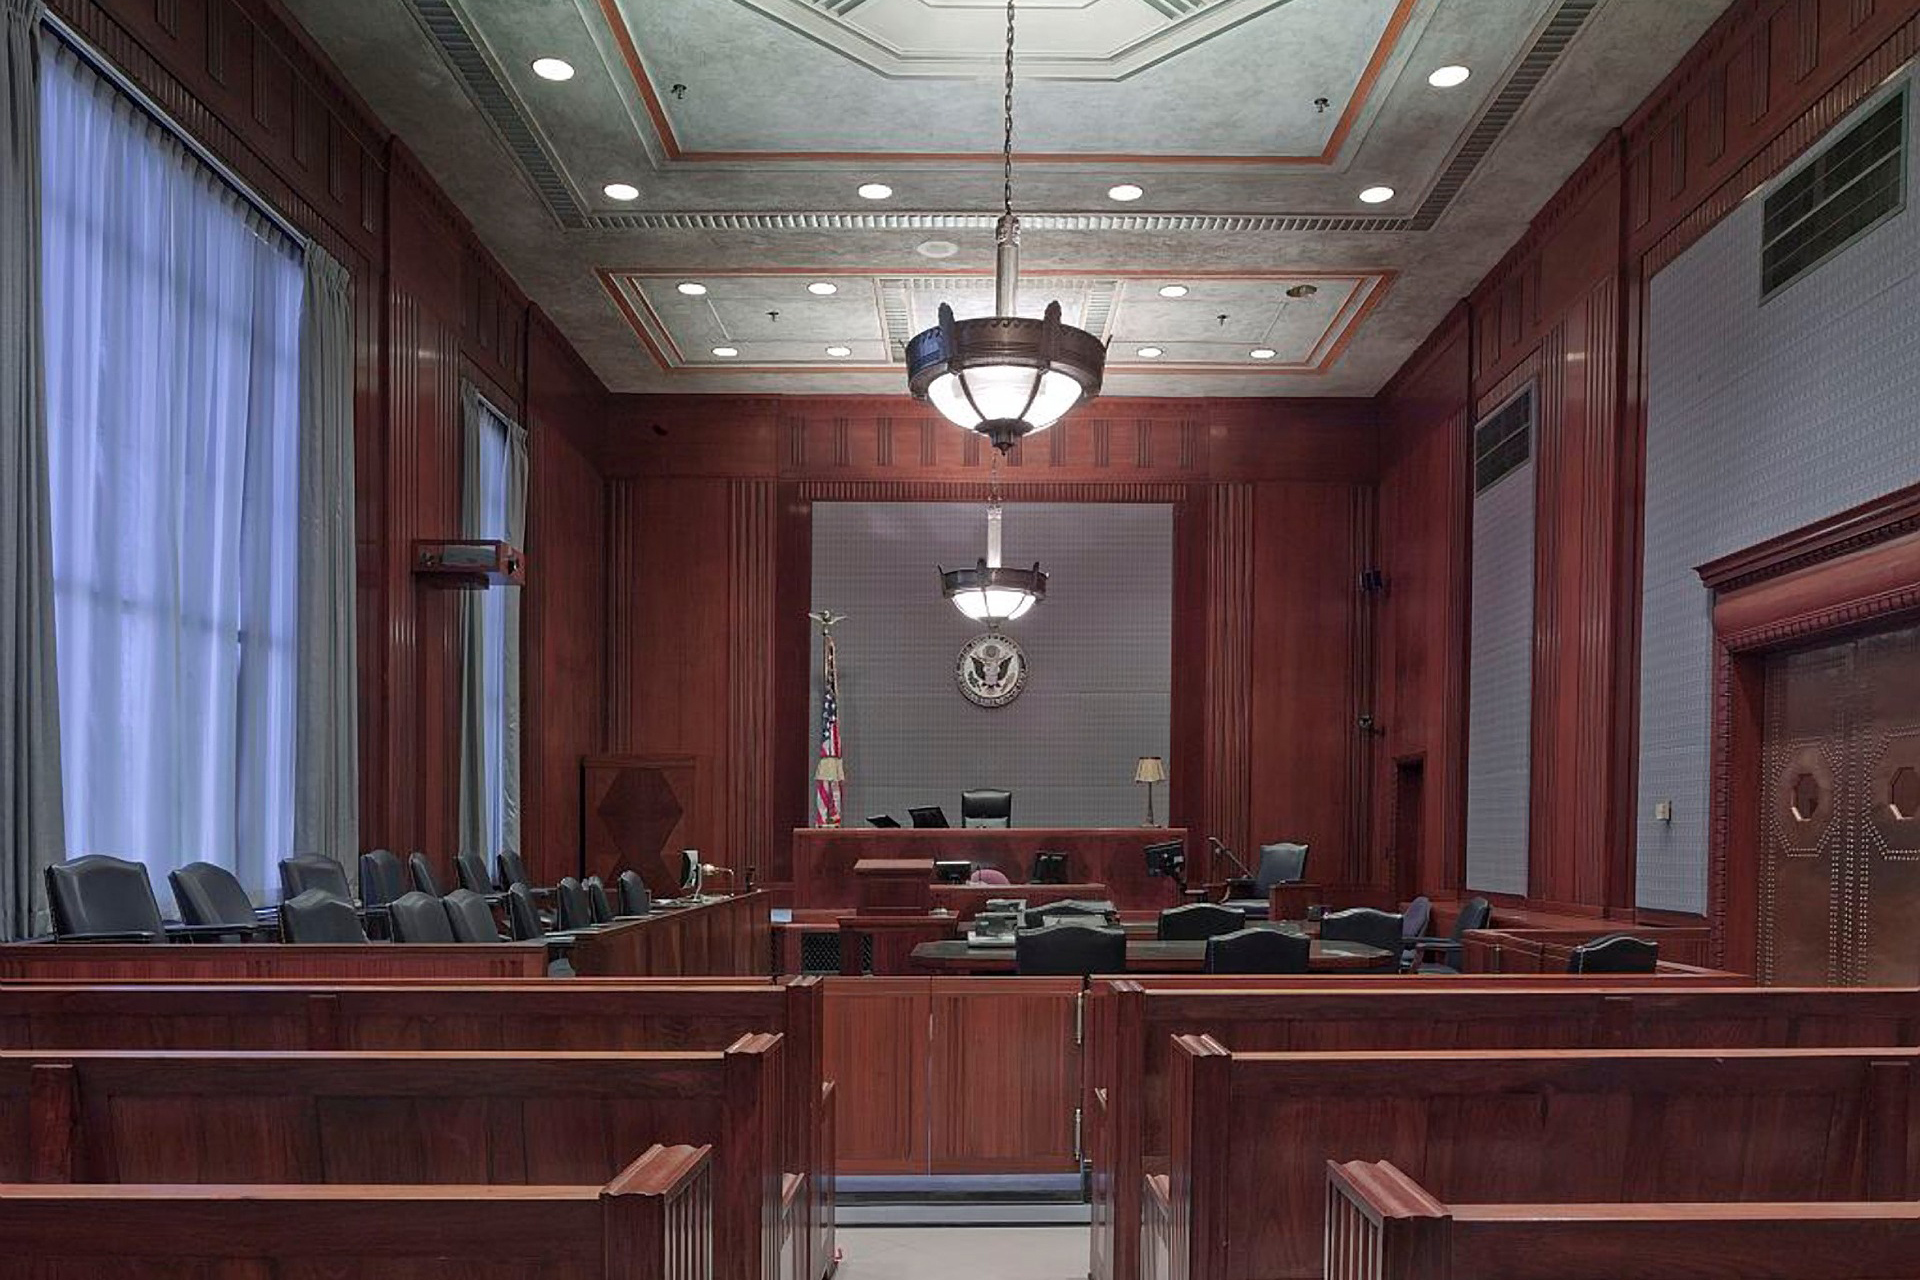 An empty courtroom with wooden walls and benches, and an ornate light fixture hanging from the center.